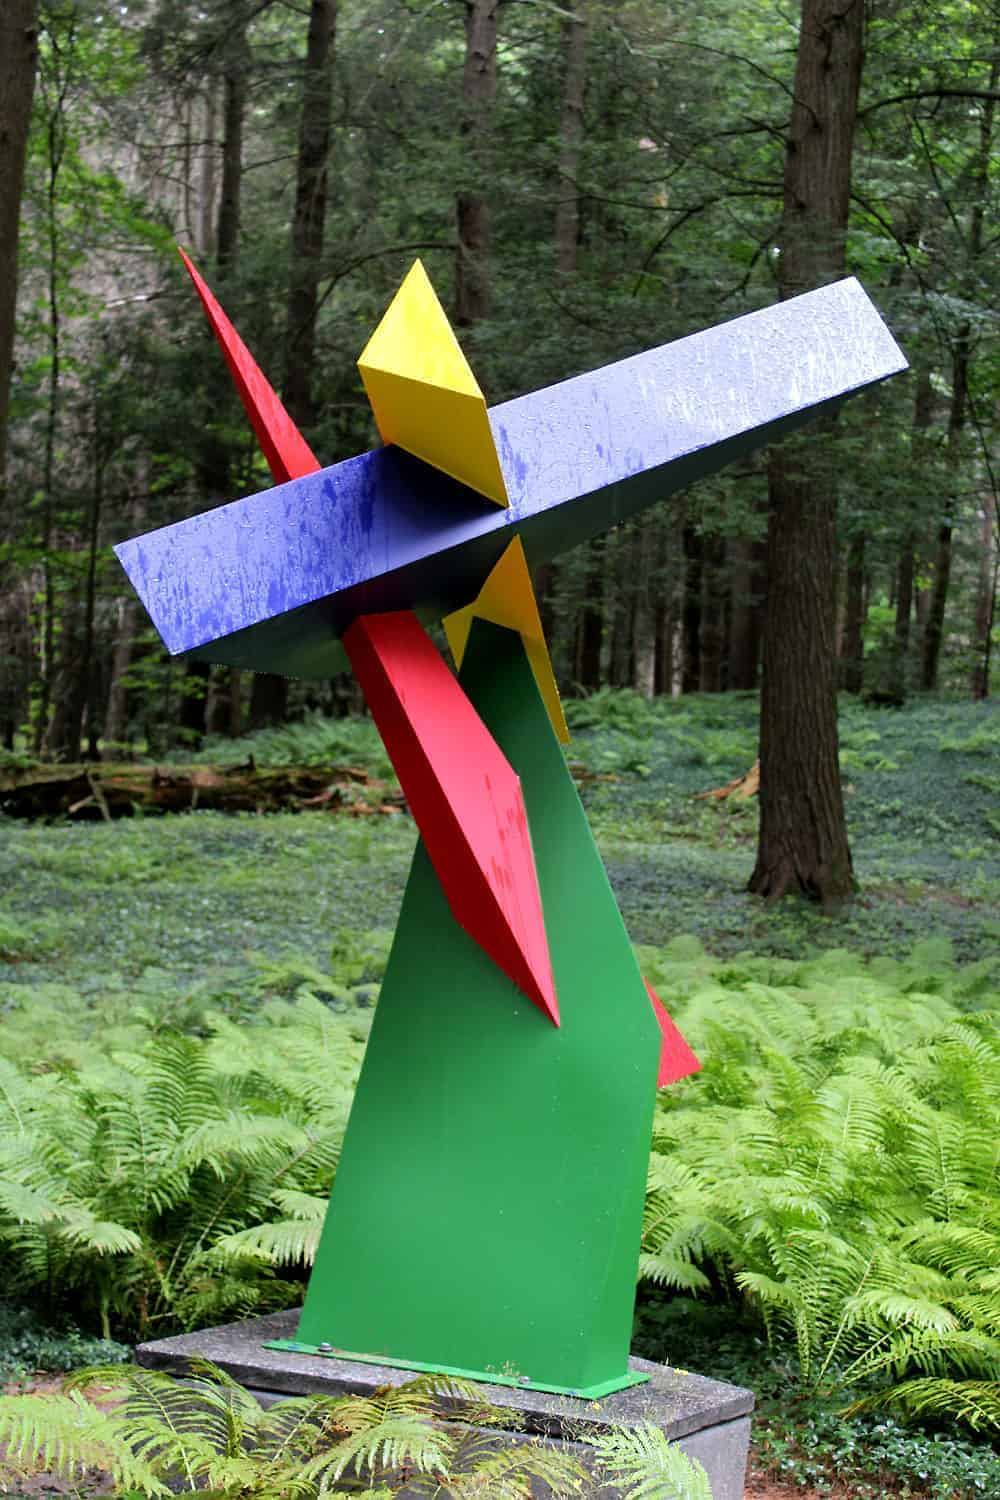 'Askew' in SculptureNow 2018 on the grounds of the Mount in Lenox.